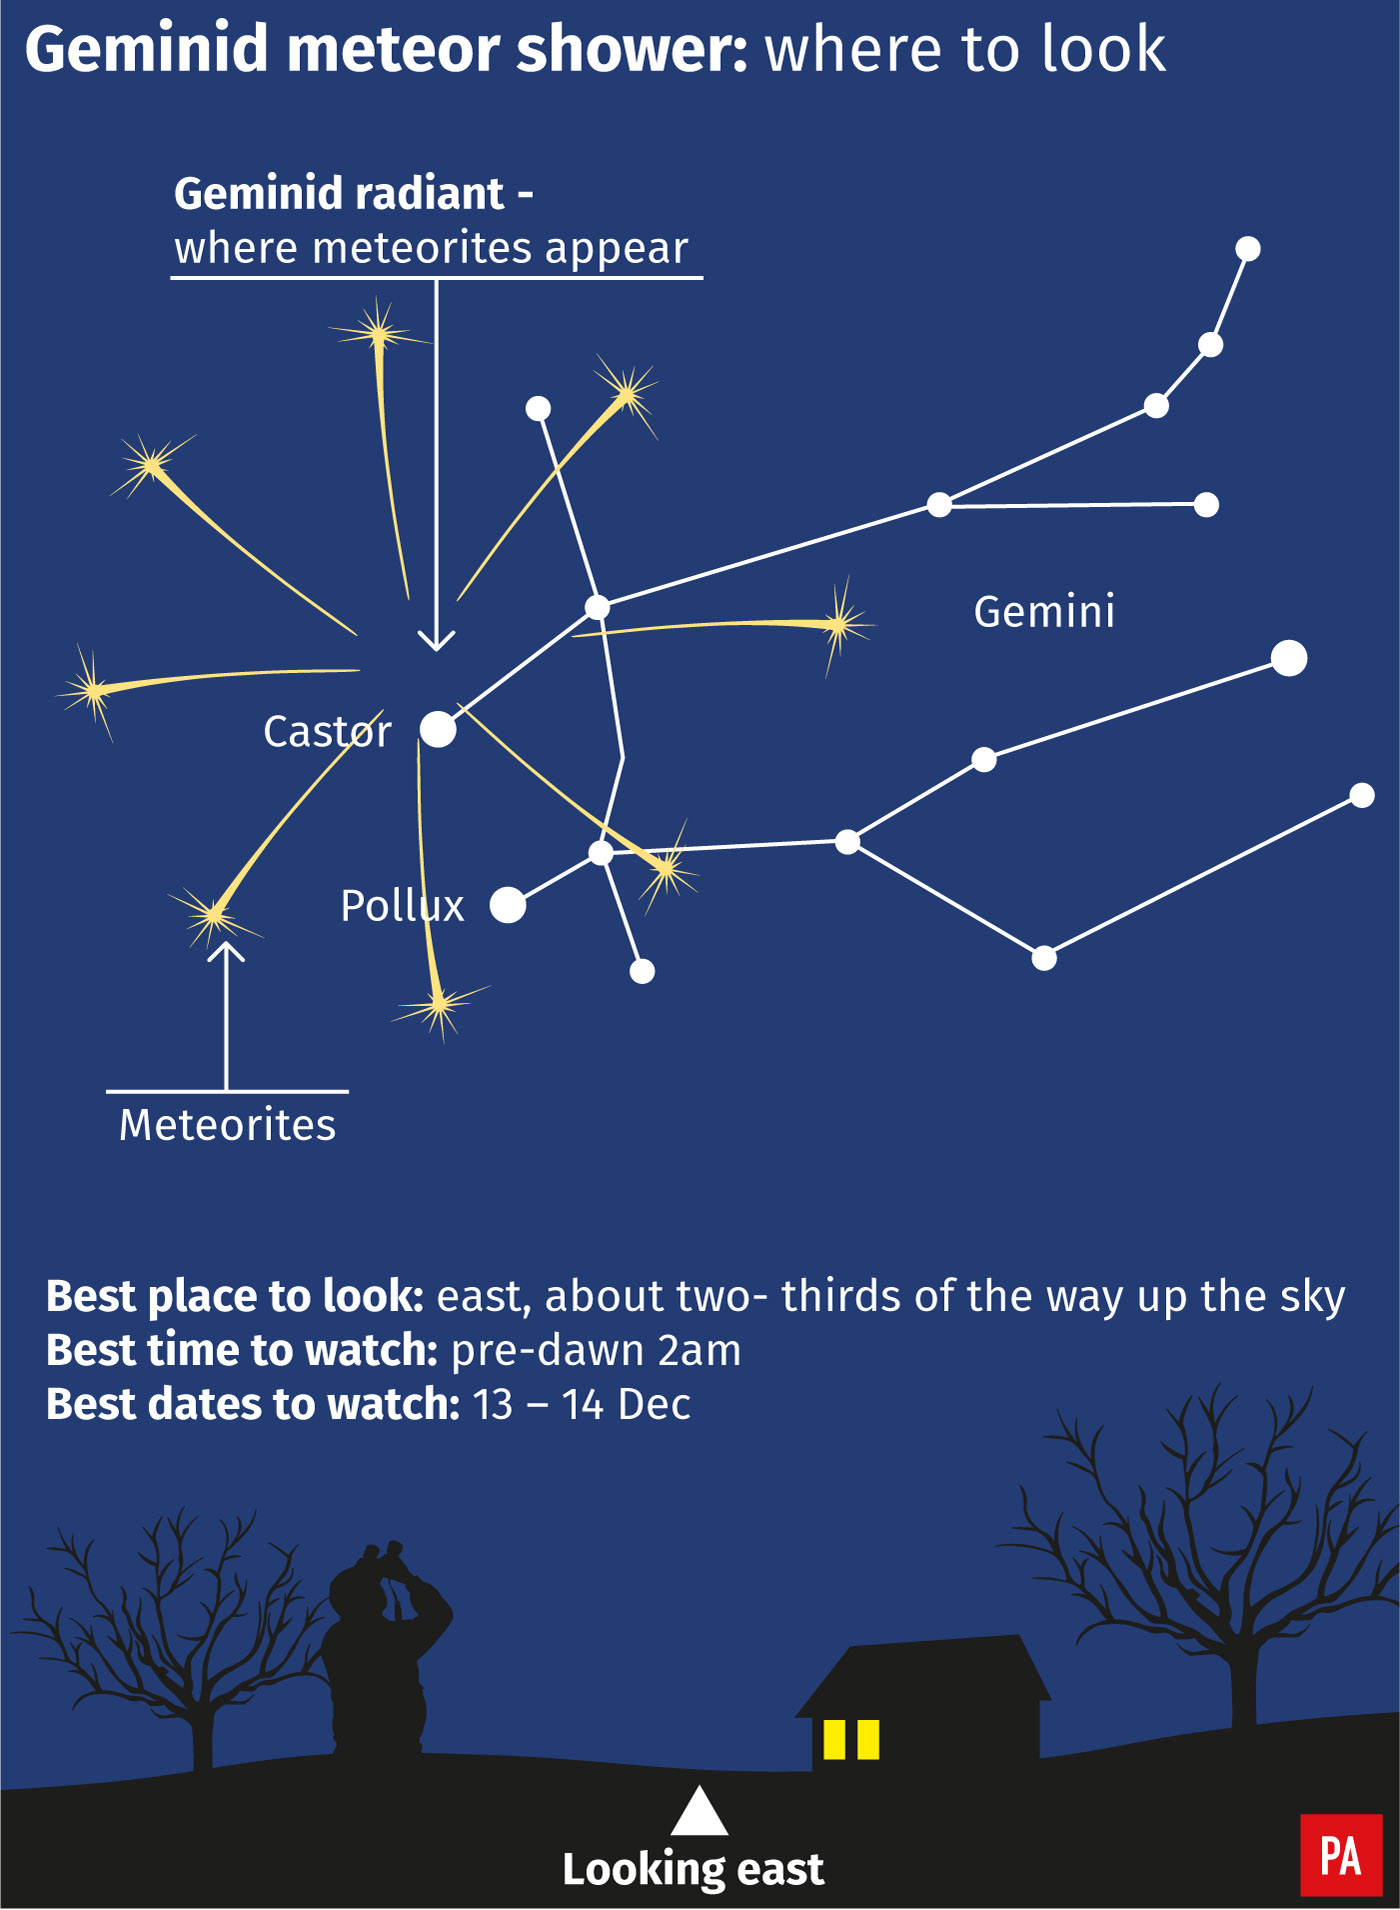 The Geminid meteor shower this week is expected to be the best in a